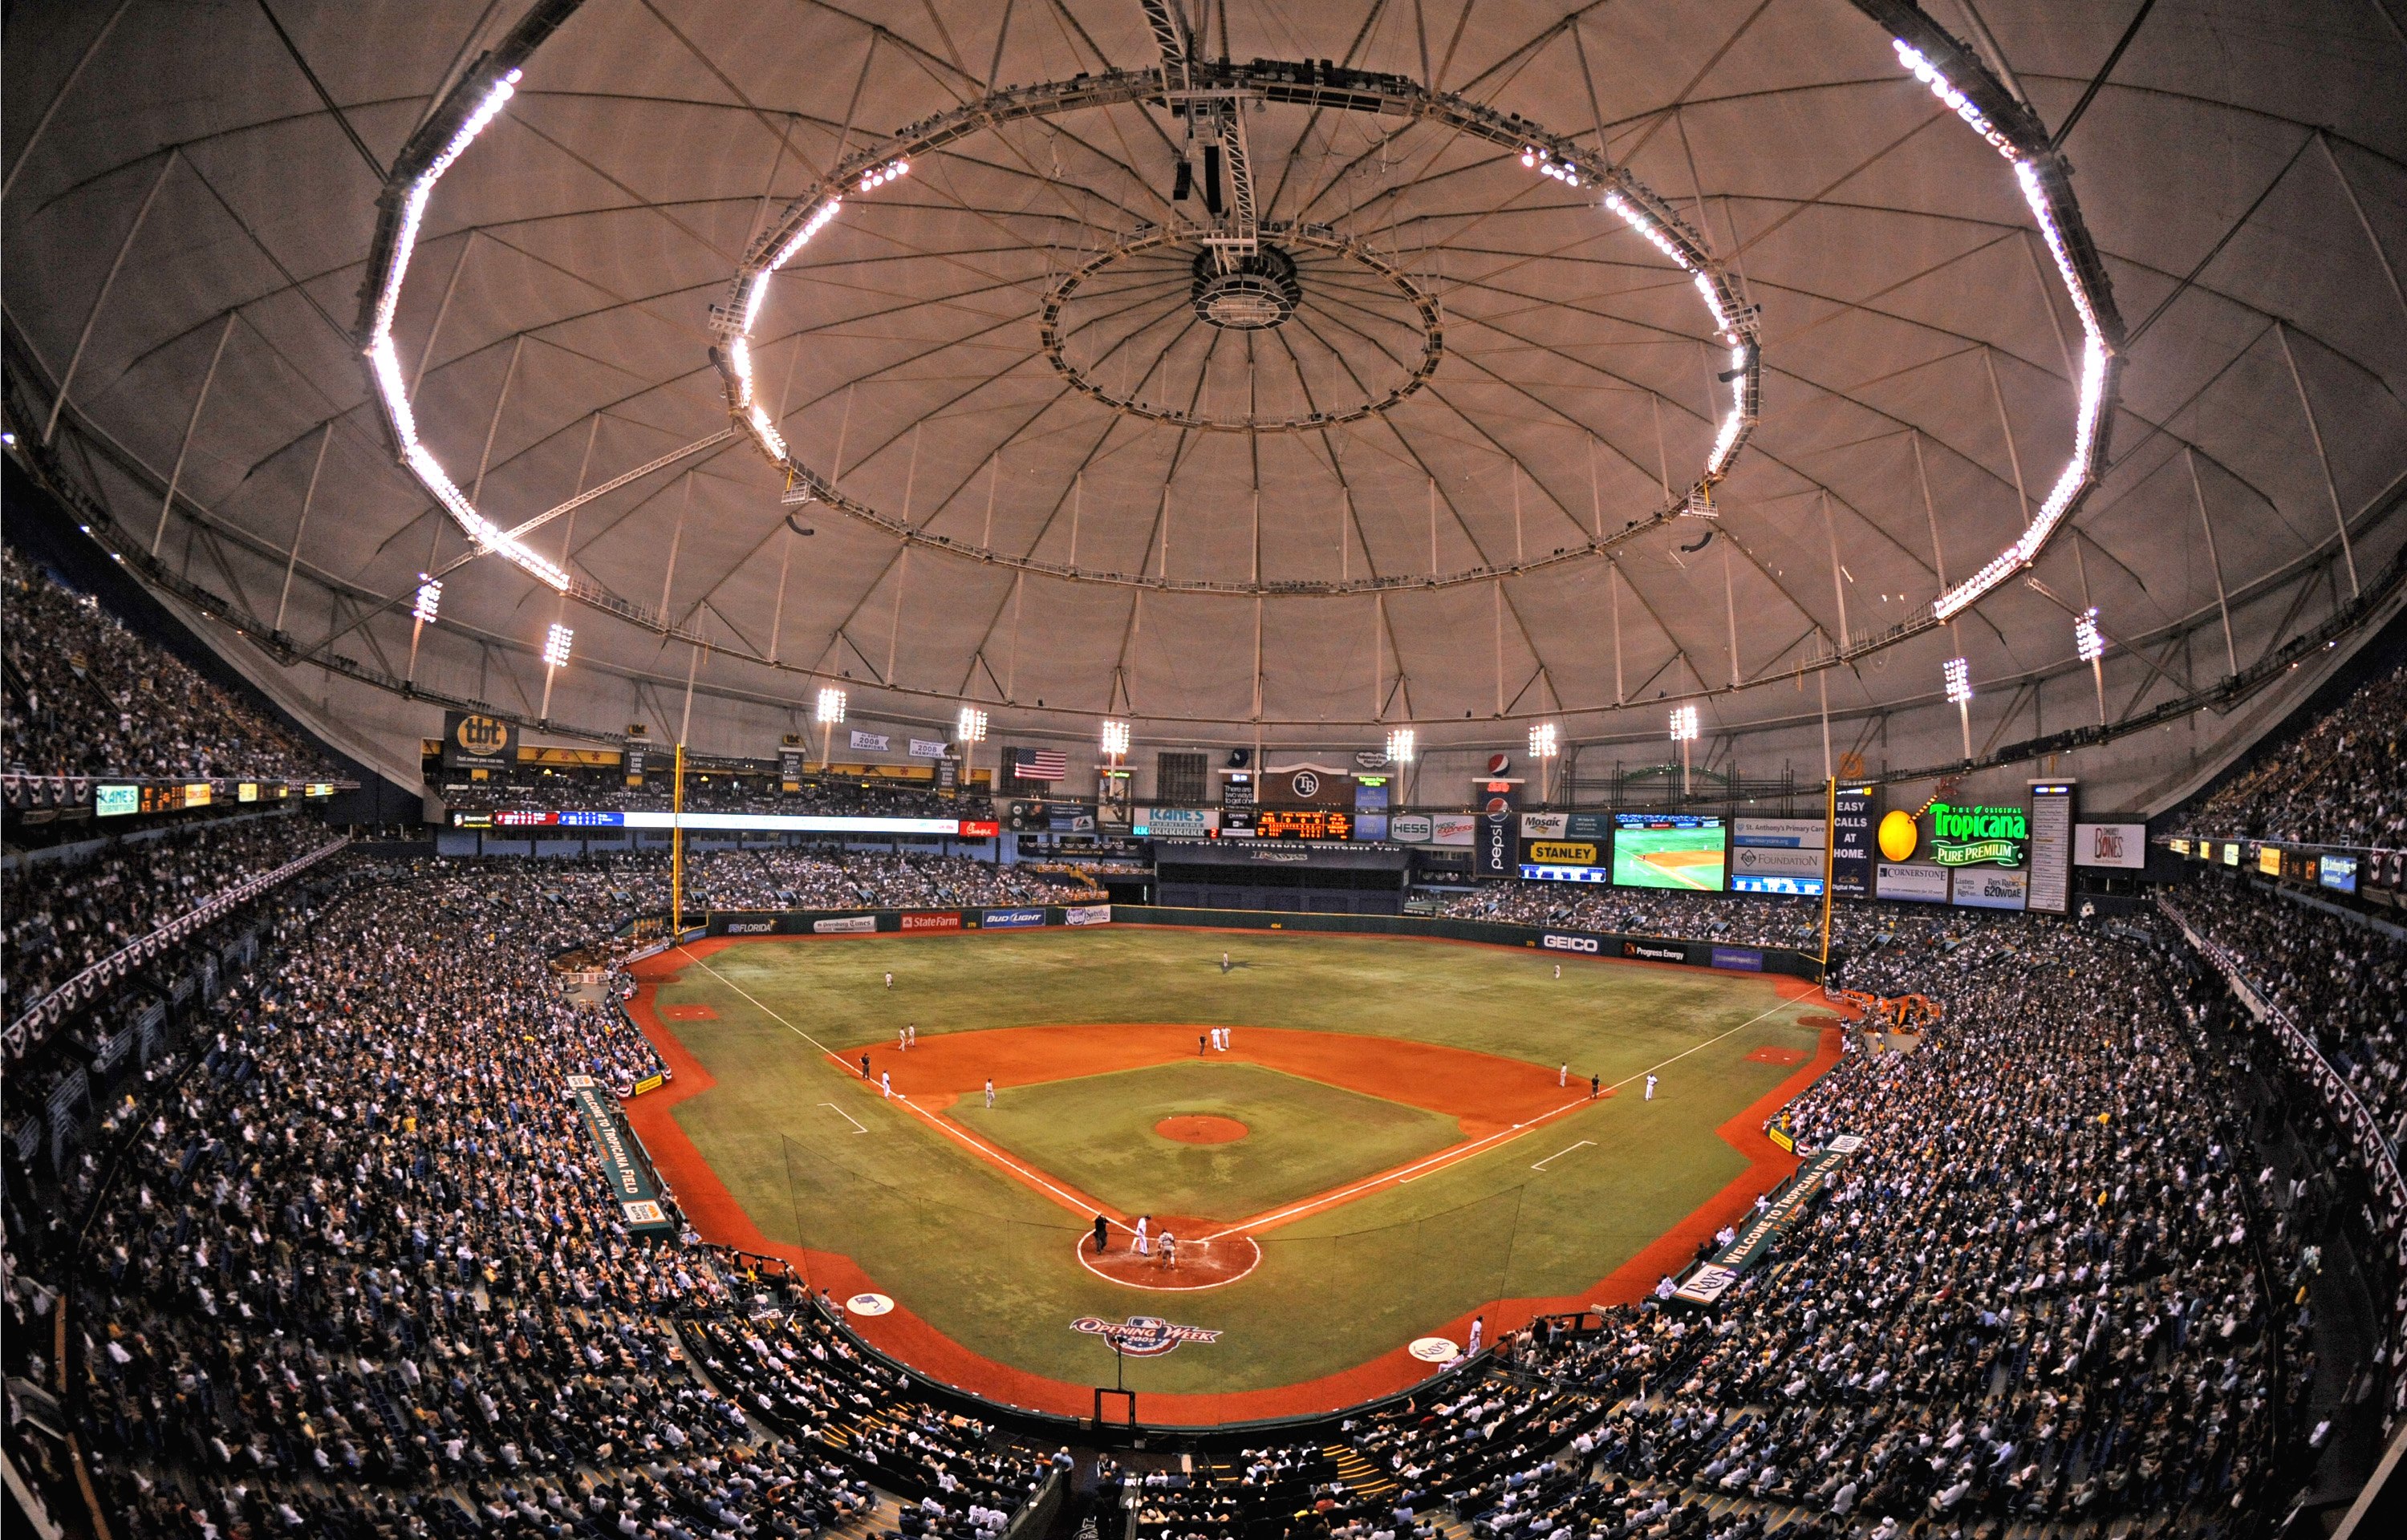 5 great reasons to go to the Rays game Sunday